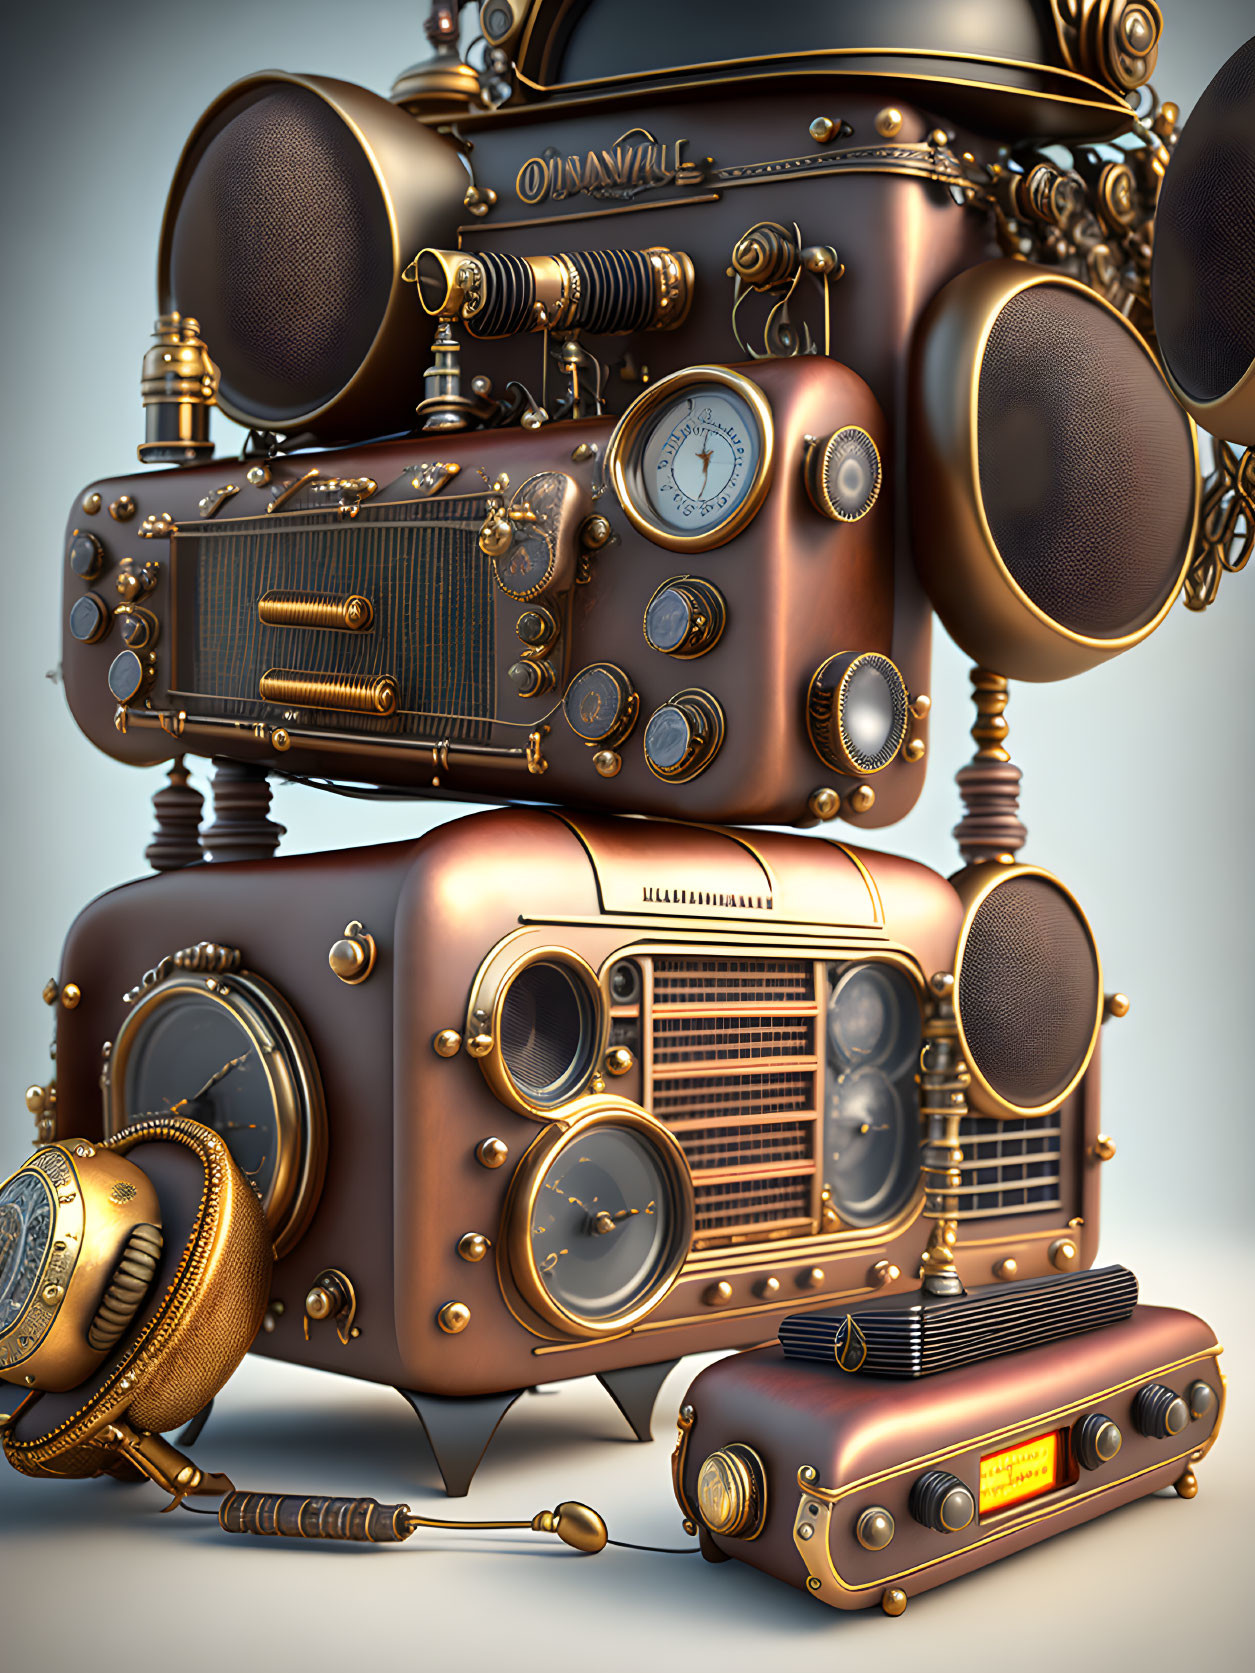 Vintage Steampunk Assembly with Microphone, Radios, Dials, and Metallic Embellishments